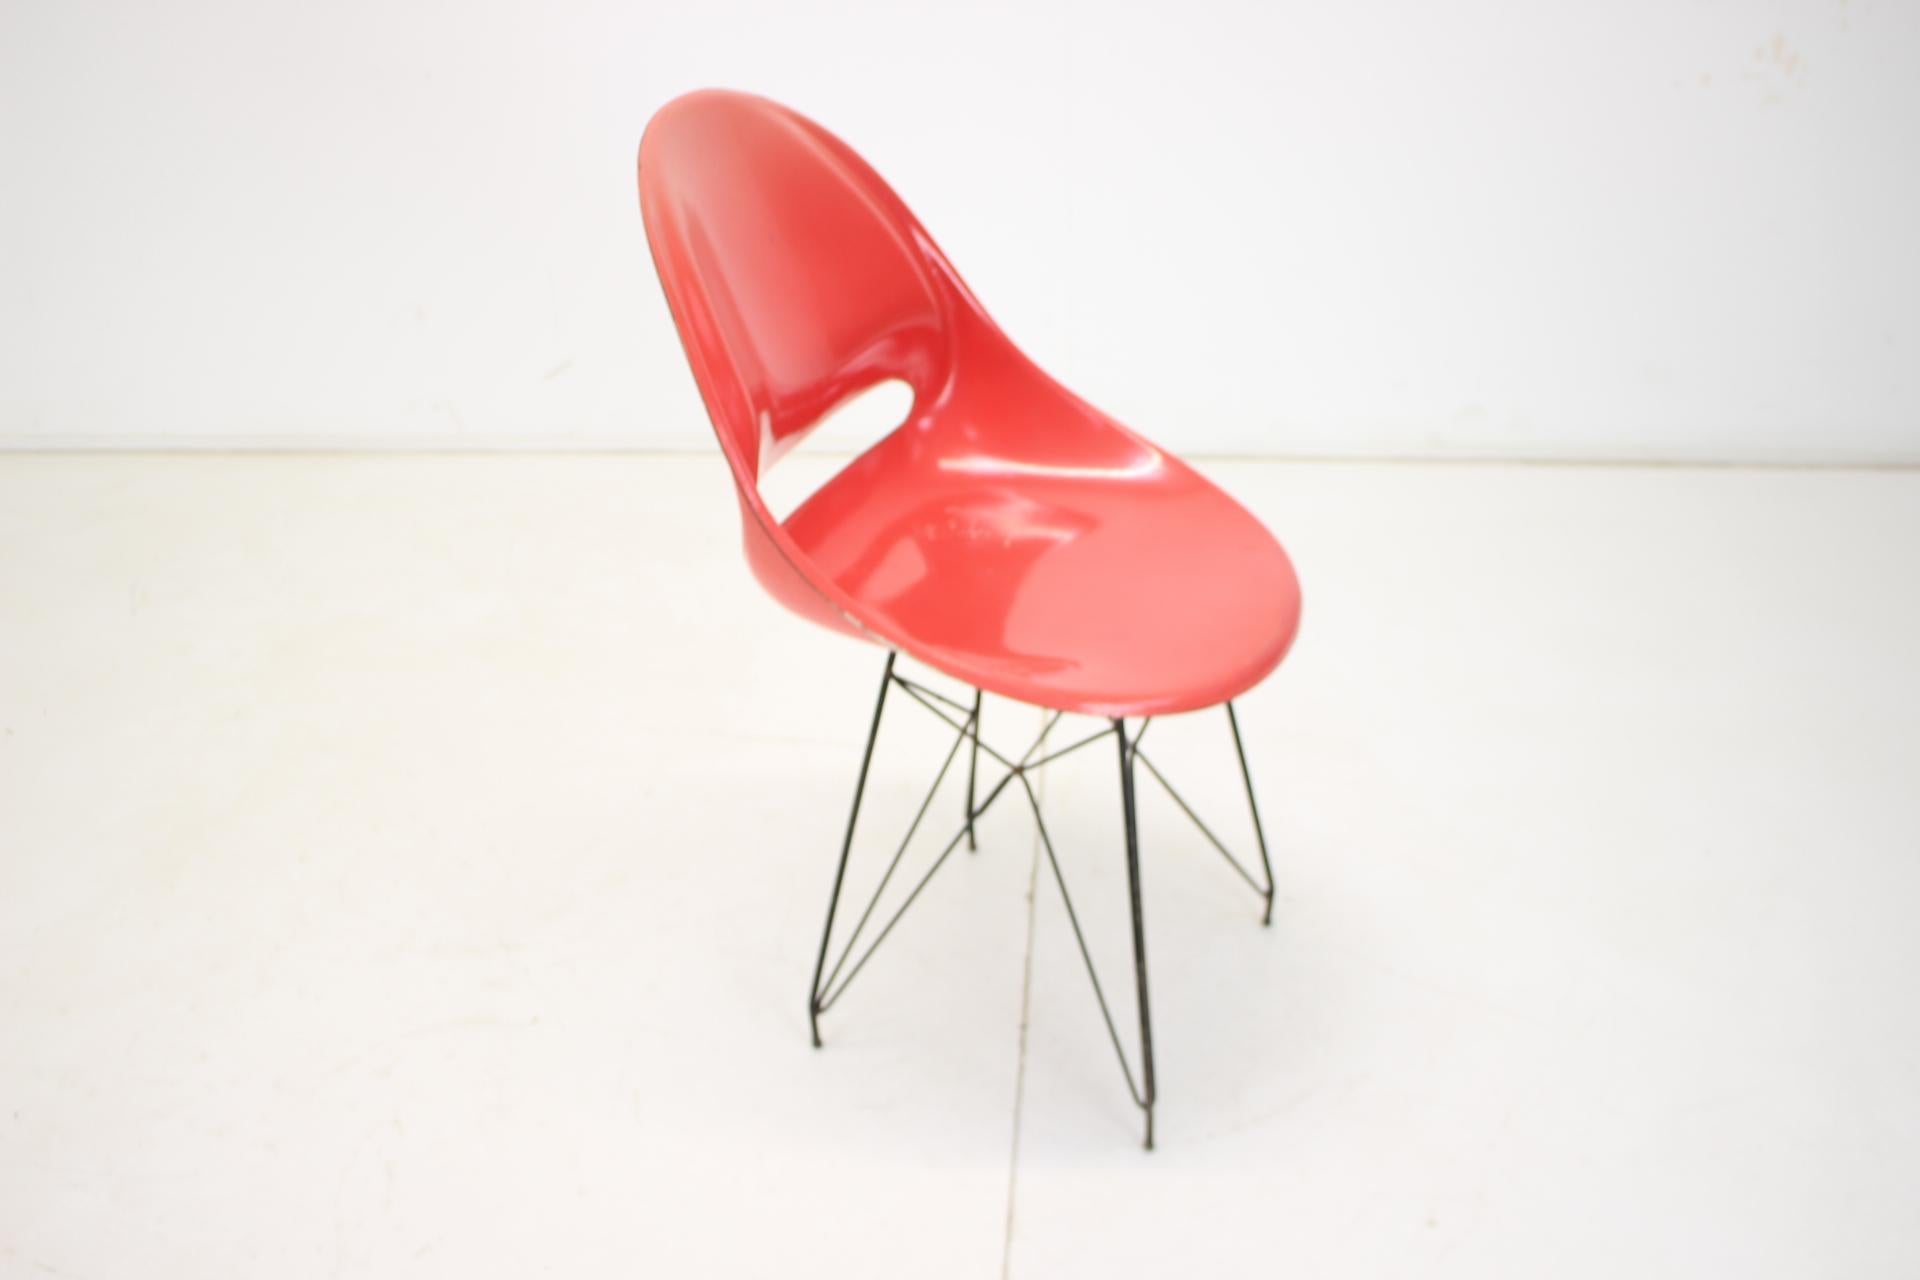 Midcentury Red Design Fiberglass Dining Chairs by M.Navratil, 1960s For Sale 3